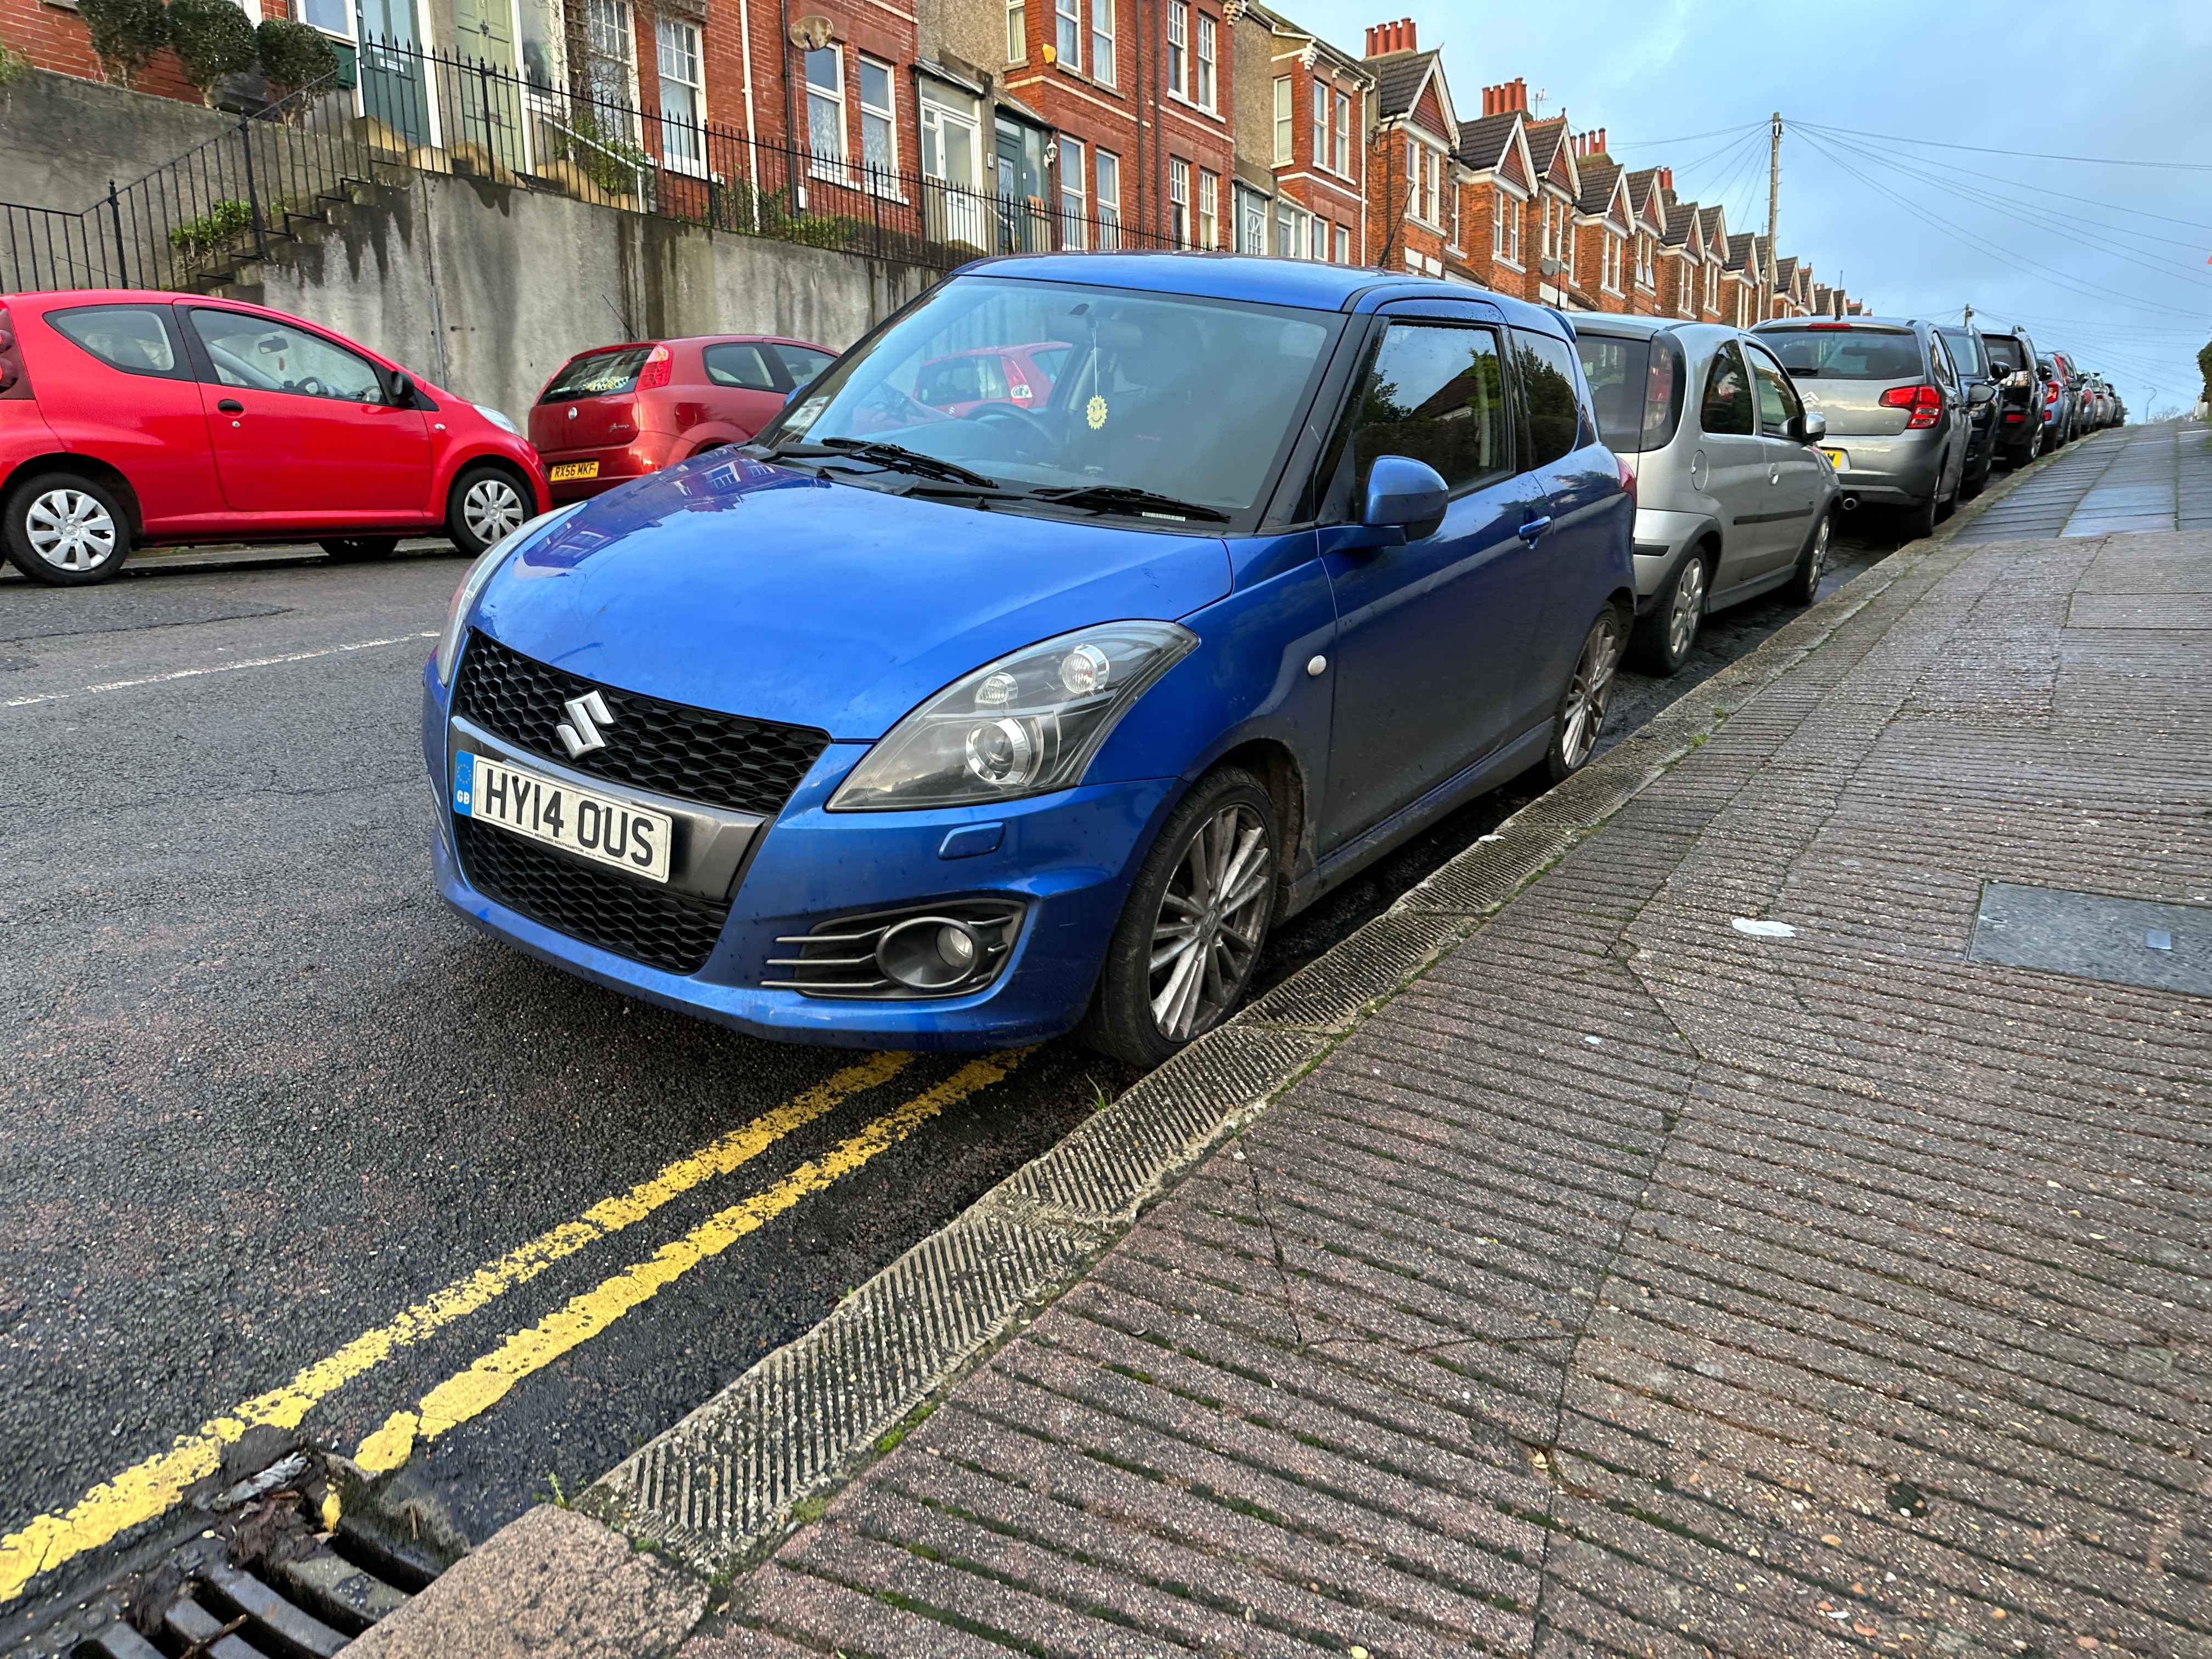 Photograph of HY14 OUS - a Blue Suzuki Swift parked in Hollingdean by a non-resident. The fourth of four photographs supplied by the residents of Hollingdean.